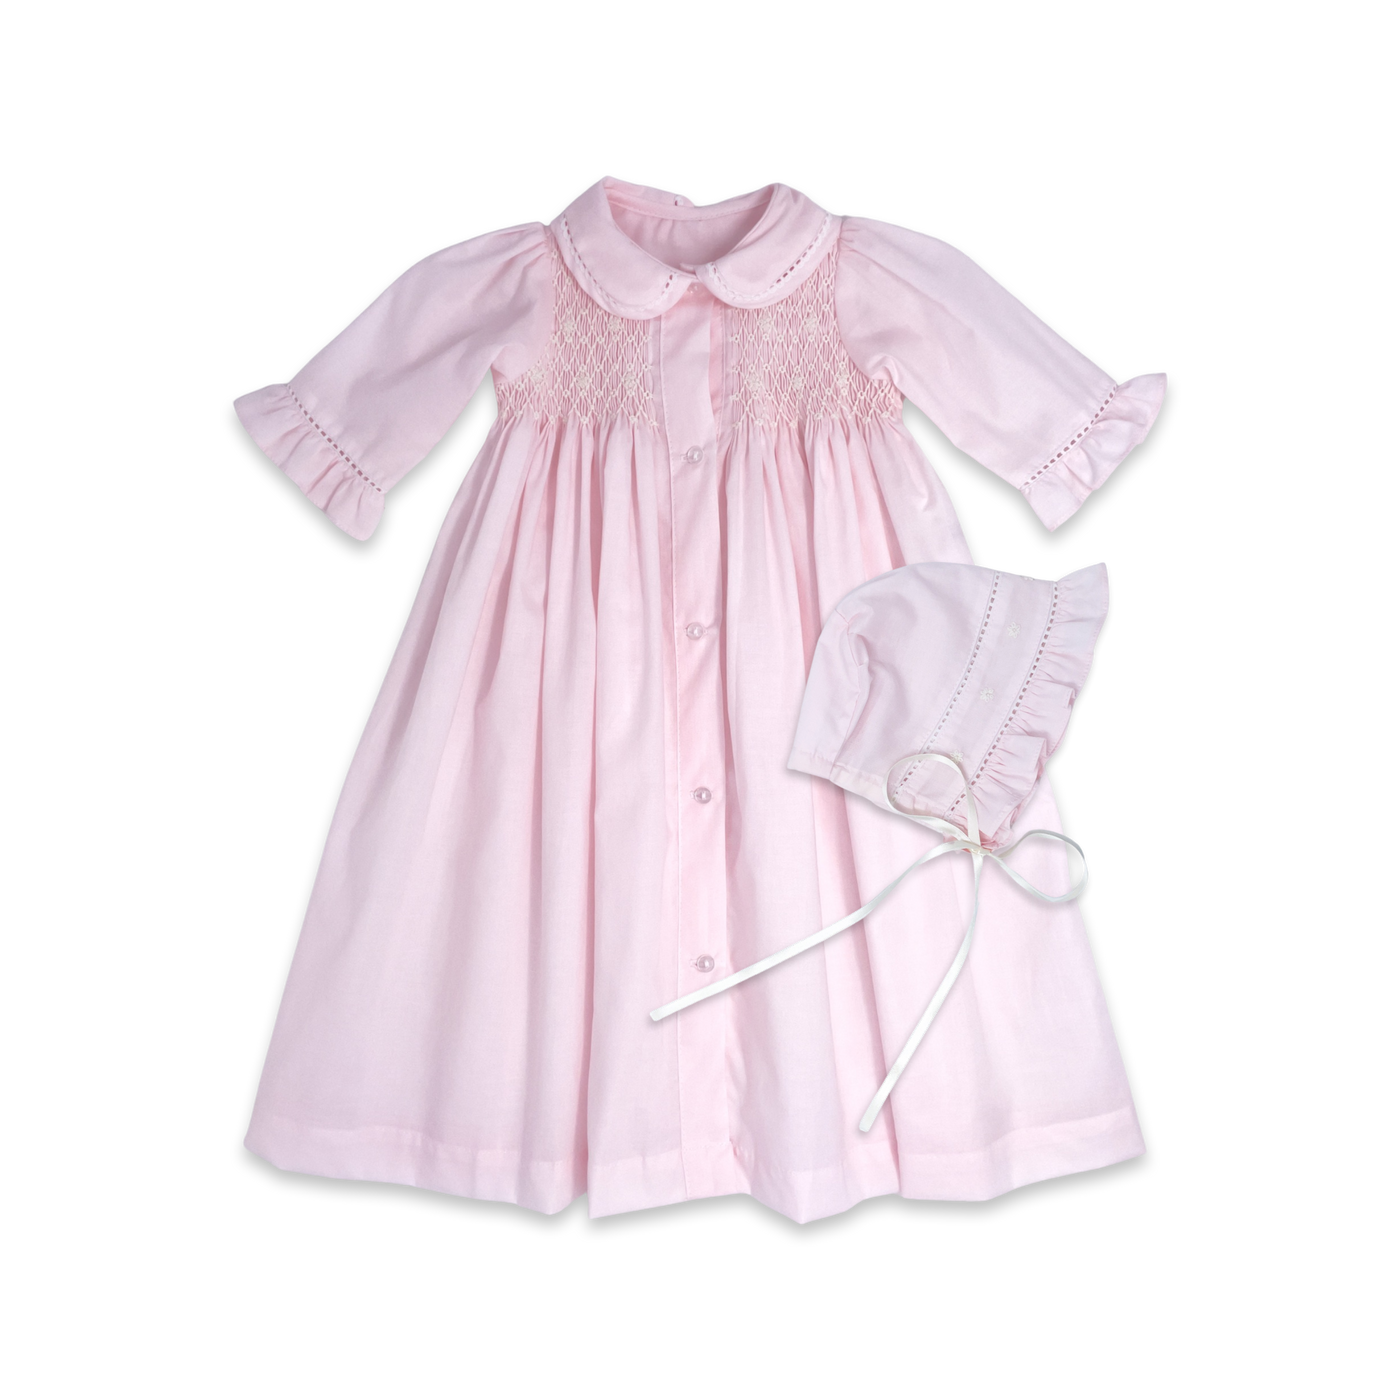 Royal Daygown Set - Blessings Pink